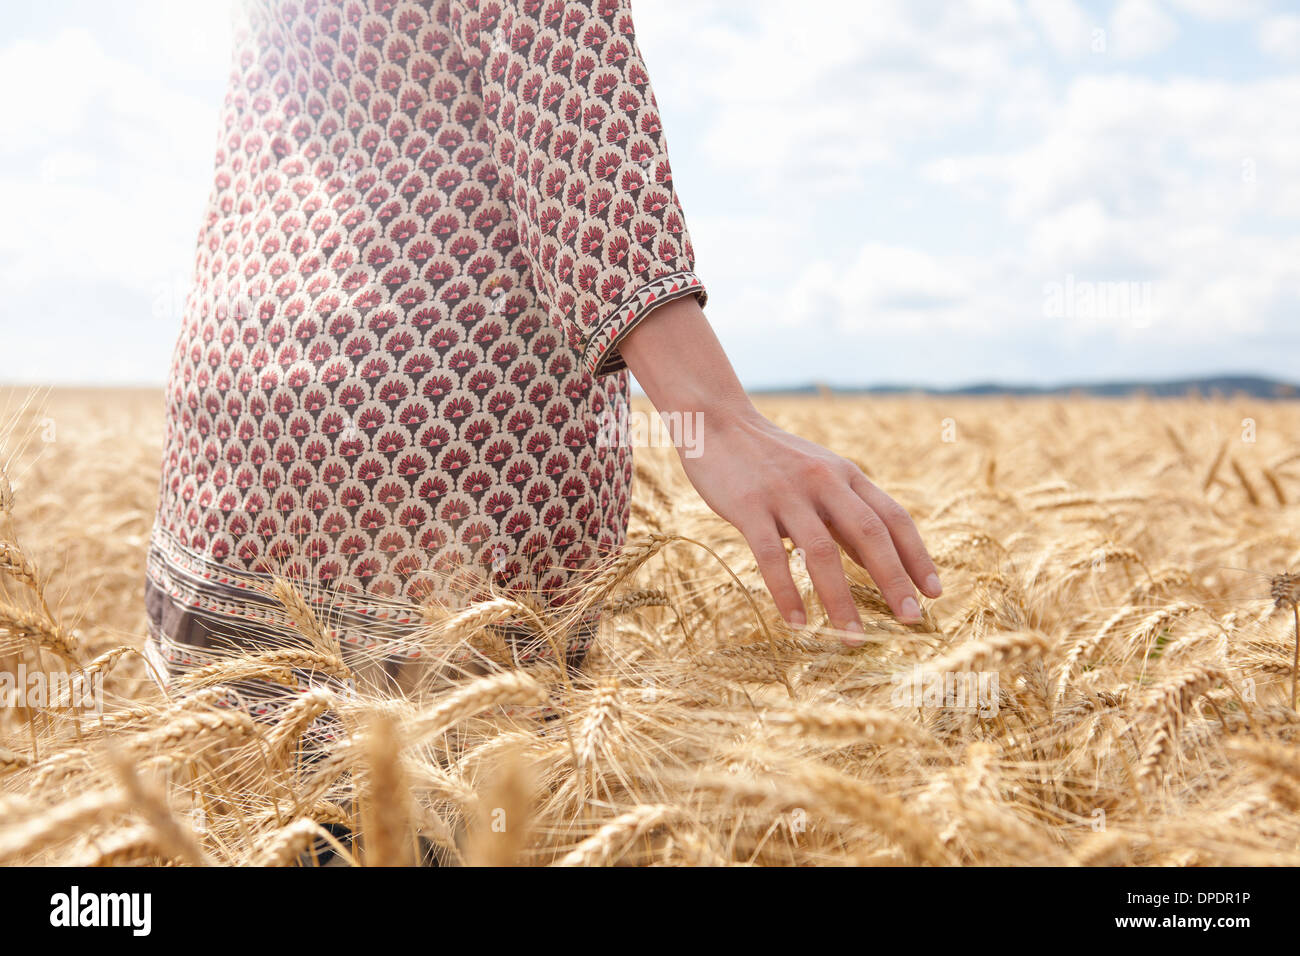 Mid section of woman in wheat field Stock Photo